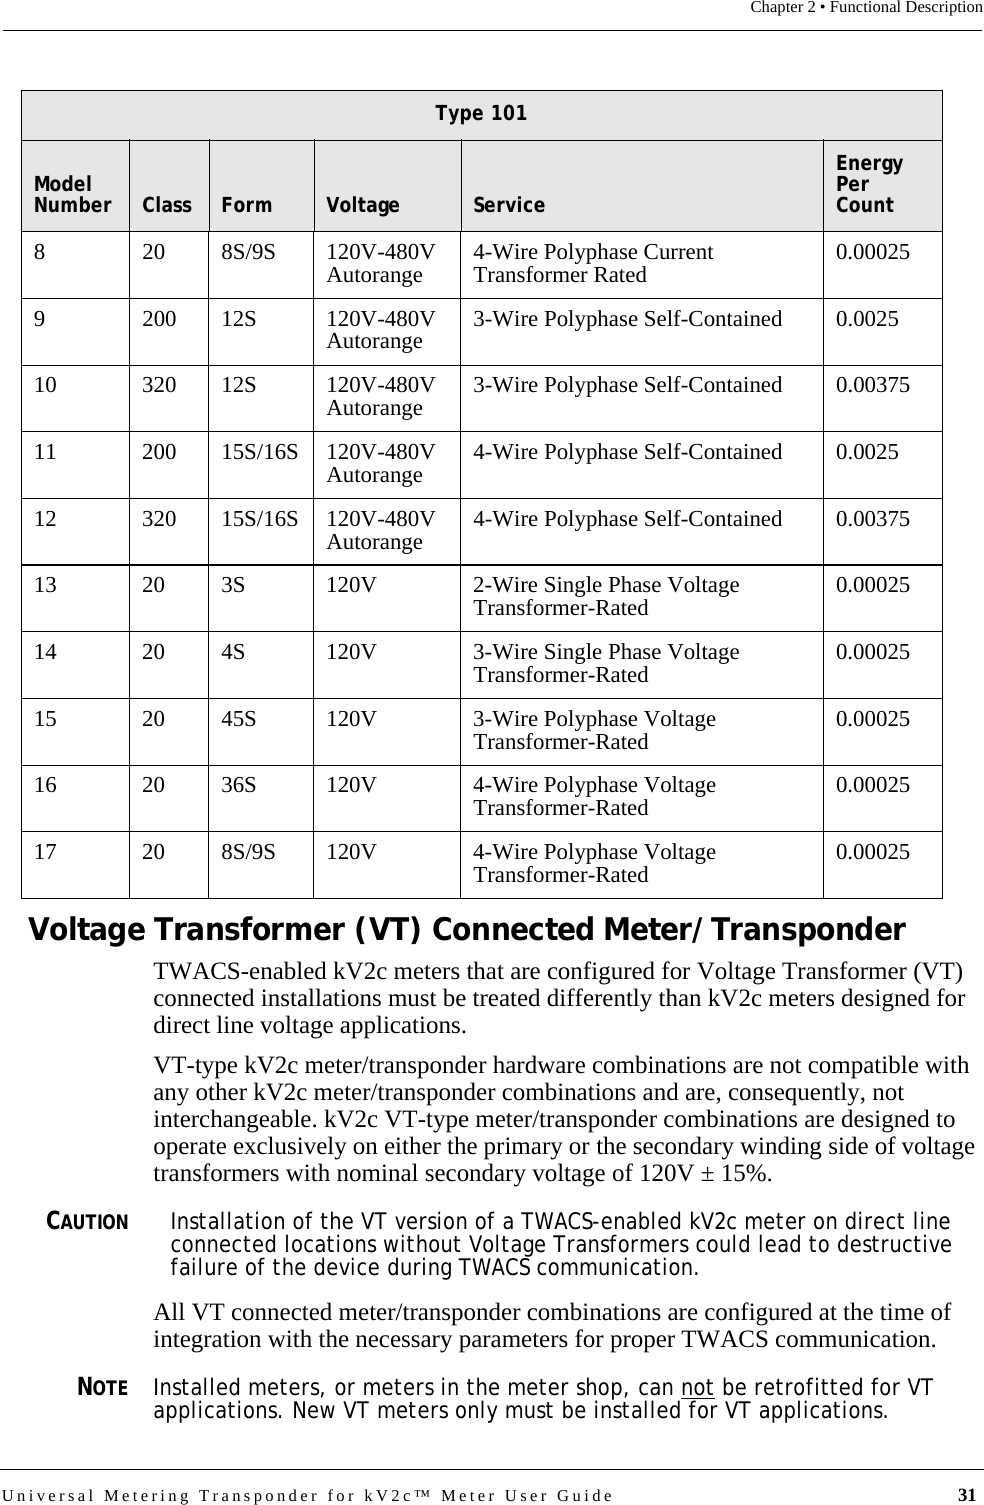 Universal Metering Transponder for kV2c™ Meter User Guide  31Chapter 2 • Functional DescriptionVoltage Transformer (VT) Connected Meter/TransponderTWACS-enabled kV2c meters that are configured for Voltage Transformer (VT) connected installations must be treated differently than kV2c meters designed for direct line voltage applications. VT-type kV2c meter/transponder hardware combinations are not compatible with any other kV2c meter/transponder combinations and are, consequently, not interchangeable. kV2c VT-type meter/transponder combinations are designed to operate exclusively on either the primary or the secondary winding side of voltage transformers with nominal secondary voltage of 120V ± 15%. CAUTIONInstallation of the VT version of a TWACS-enabled kV2c meter on direct line connected locations without Voltage Transformers could lead to destructive failure of the device during TWACS communication.All VT connected meter/transponder combinations are configured at the time of integration with the necessary parameters for proper TWACS communication.NOTEInstalled meters, or meters in the meter shop, can not be retrofitted for VT applications. New VT meters only must be installed for VT applications.8 20 8S/9S 120V-480VAutorange 4-Wire Polyphase Current Transformer Rated 0.000259 200 12S 120V-480VAutorange 3-Wire Polyphase Self-Contained 0.002510 320 12S 120V-480VAutorange 3-Wire Polyphase Self-Contained 0.0037511 200 15S/16S 120V-480VAutorange 4-Wire Polyphase Self-Contained 0.002512 320 15S/16S 120V-480VAutorange 4-Wire Polyphase Self-Contained 0.0037513 20 3S 120V 2-Wire Single Phase Voltage Transformer-Rated 0.0002514 20 4S 120V 3-Wire Single Phase Voltage Transformer-Rated 0.0002515 20 45S 120V 3-Wire Polyphase Voltage Transformer-Rated 0.0002516 20 36S 120V 4-Wire Polyphase Voltage Transformer-Rated 0.0002517 20 8S/9S 120V 4-Wire Polyphase Voltage Transformer-Rated 0.00025Type 101ModelNumber Class Form Voltage ServiceEnergy Per Count